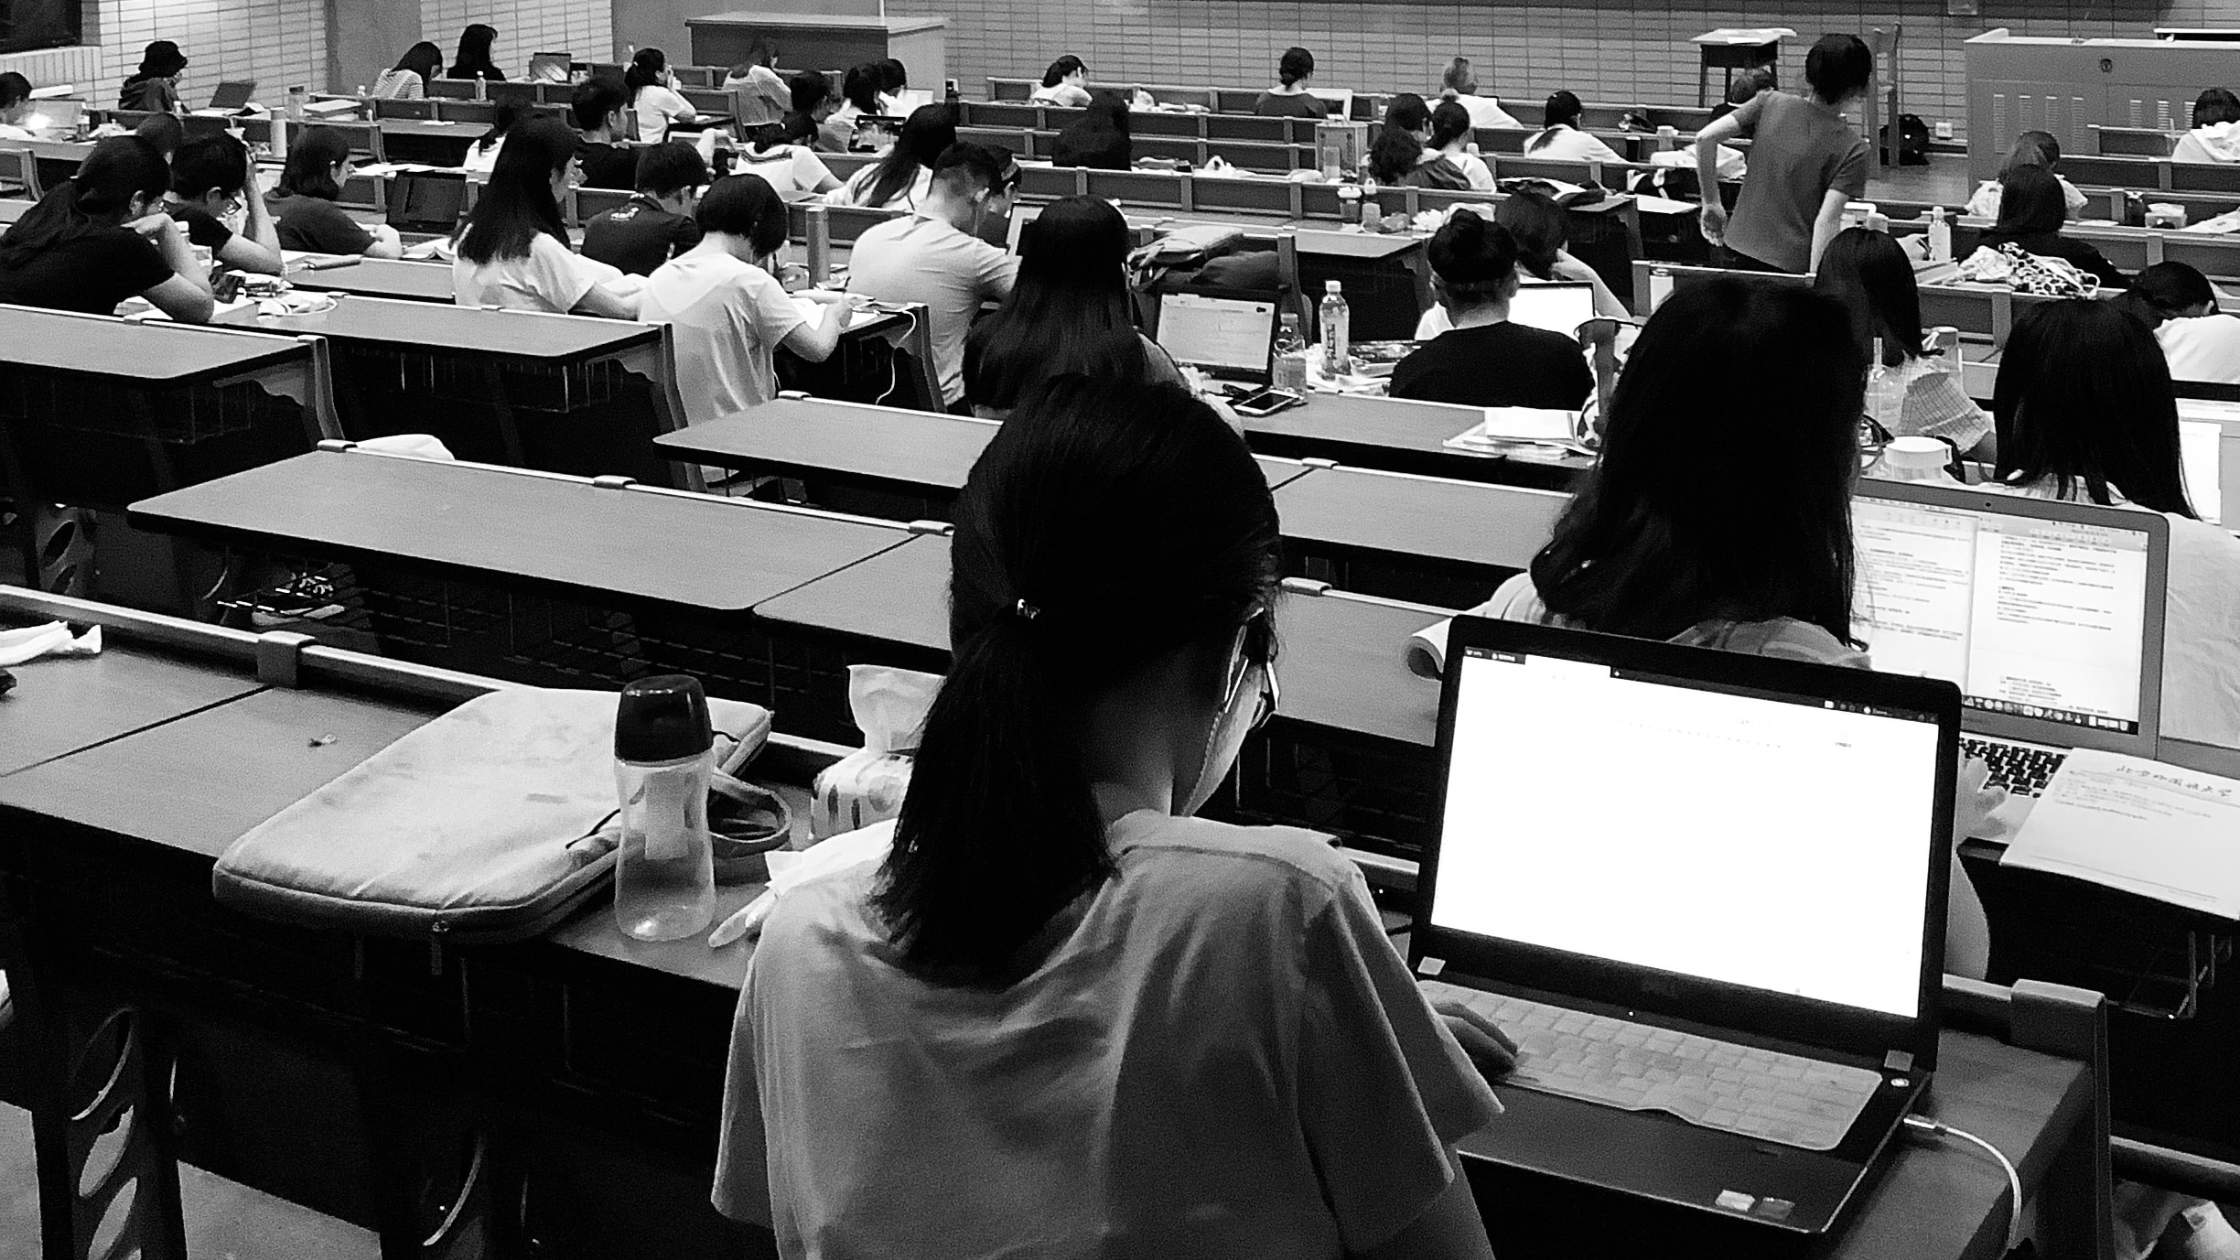 A grayscale image of people sitting in a lecture hall using laptops